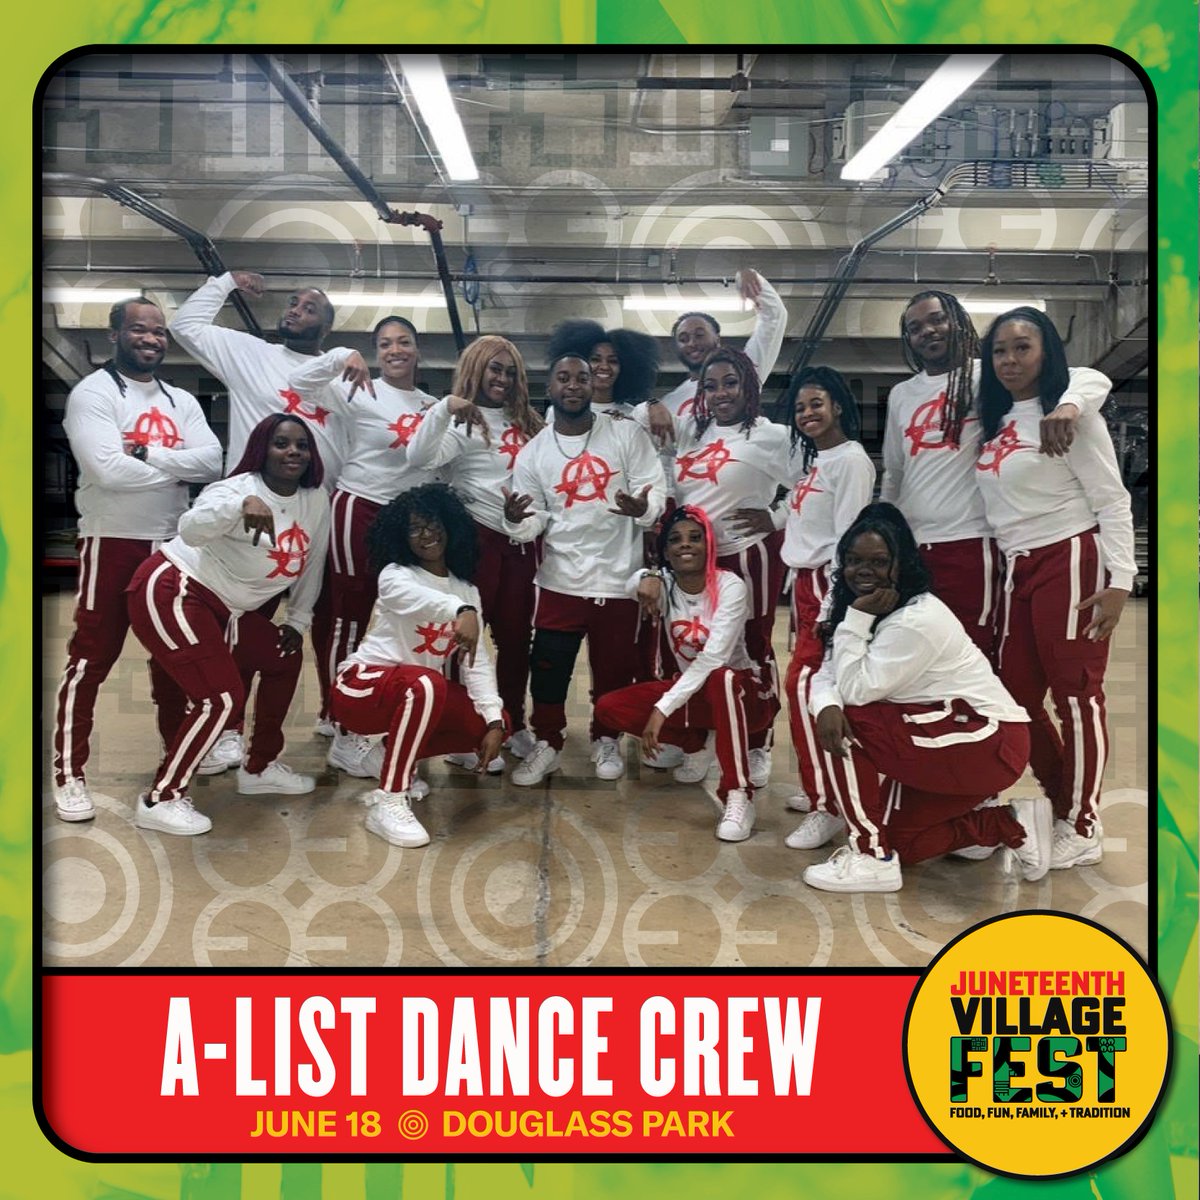 We are excited to welcome the A-List Dance Crew to the stage at the second annual Juneteenth Village Fest in Chicago's Anna & Frederick Douglass Park on Sunday June 18, 2023.

Volunteer: https://t.co/e9gx7jnkHS https://t.co/lXlcAQGN80